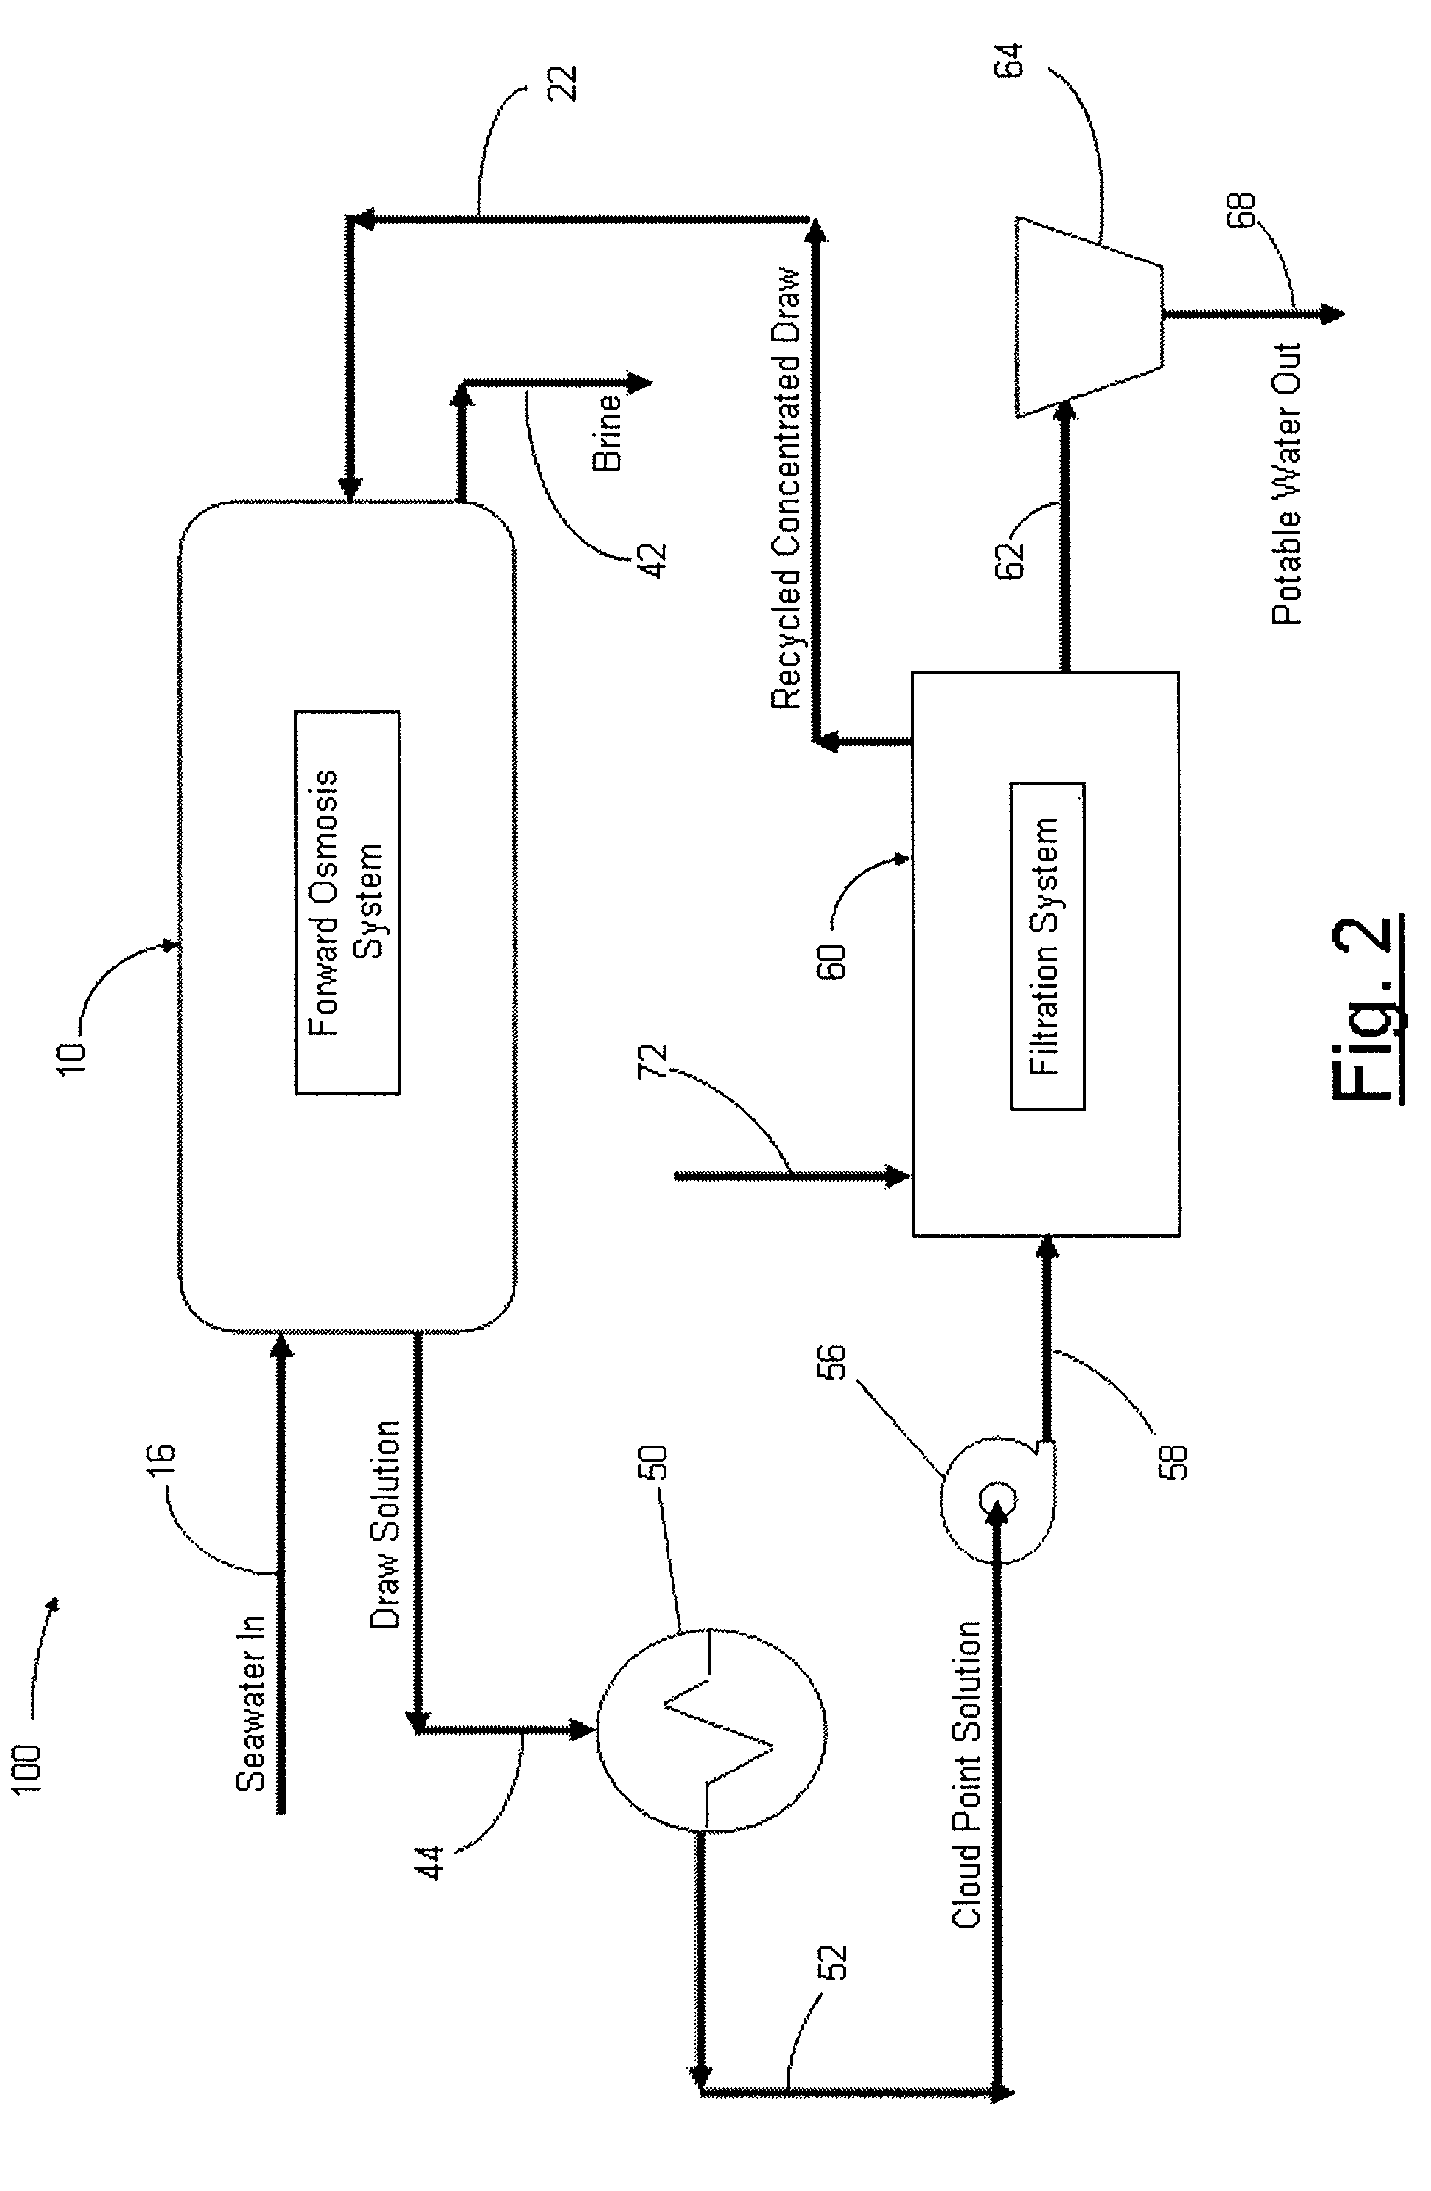 Systems and methods for forward osmosis fluid purification using cloud point extraction